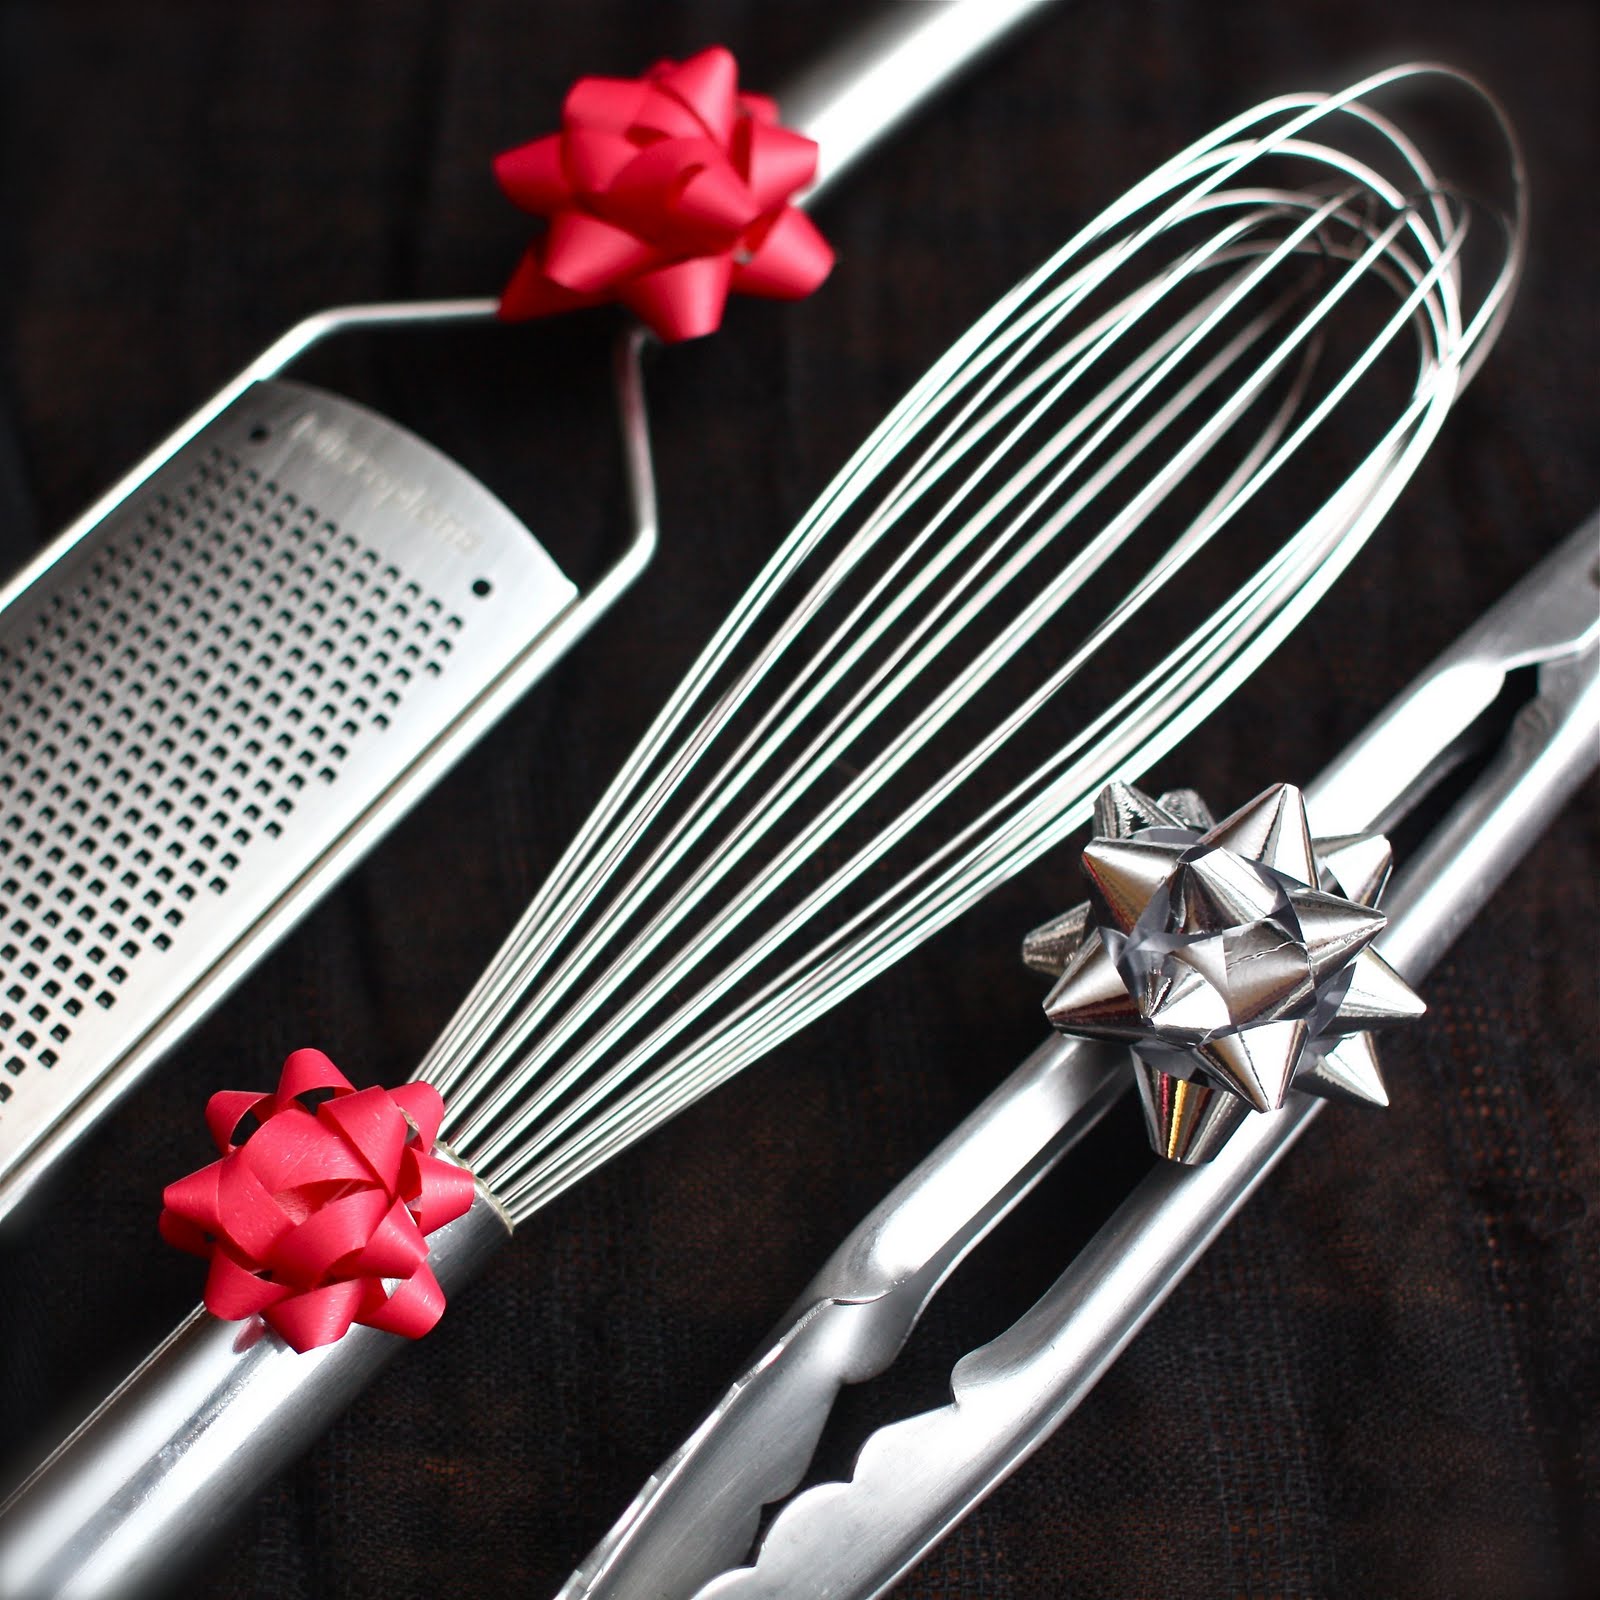 Cookbooks & Kitchen Items: My Top Picks for Gifting